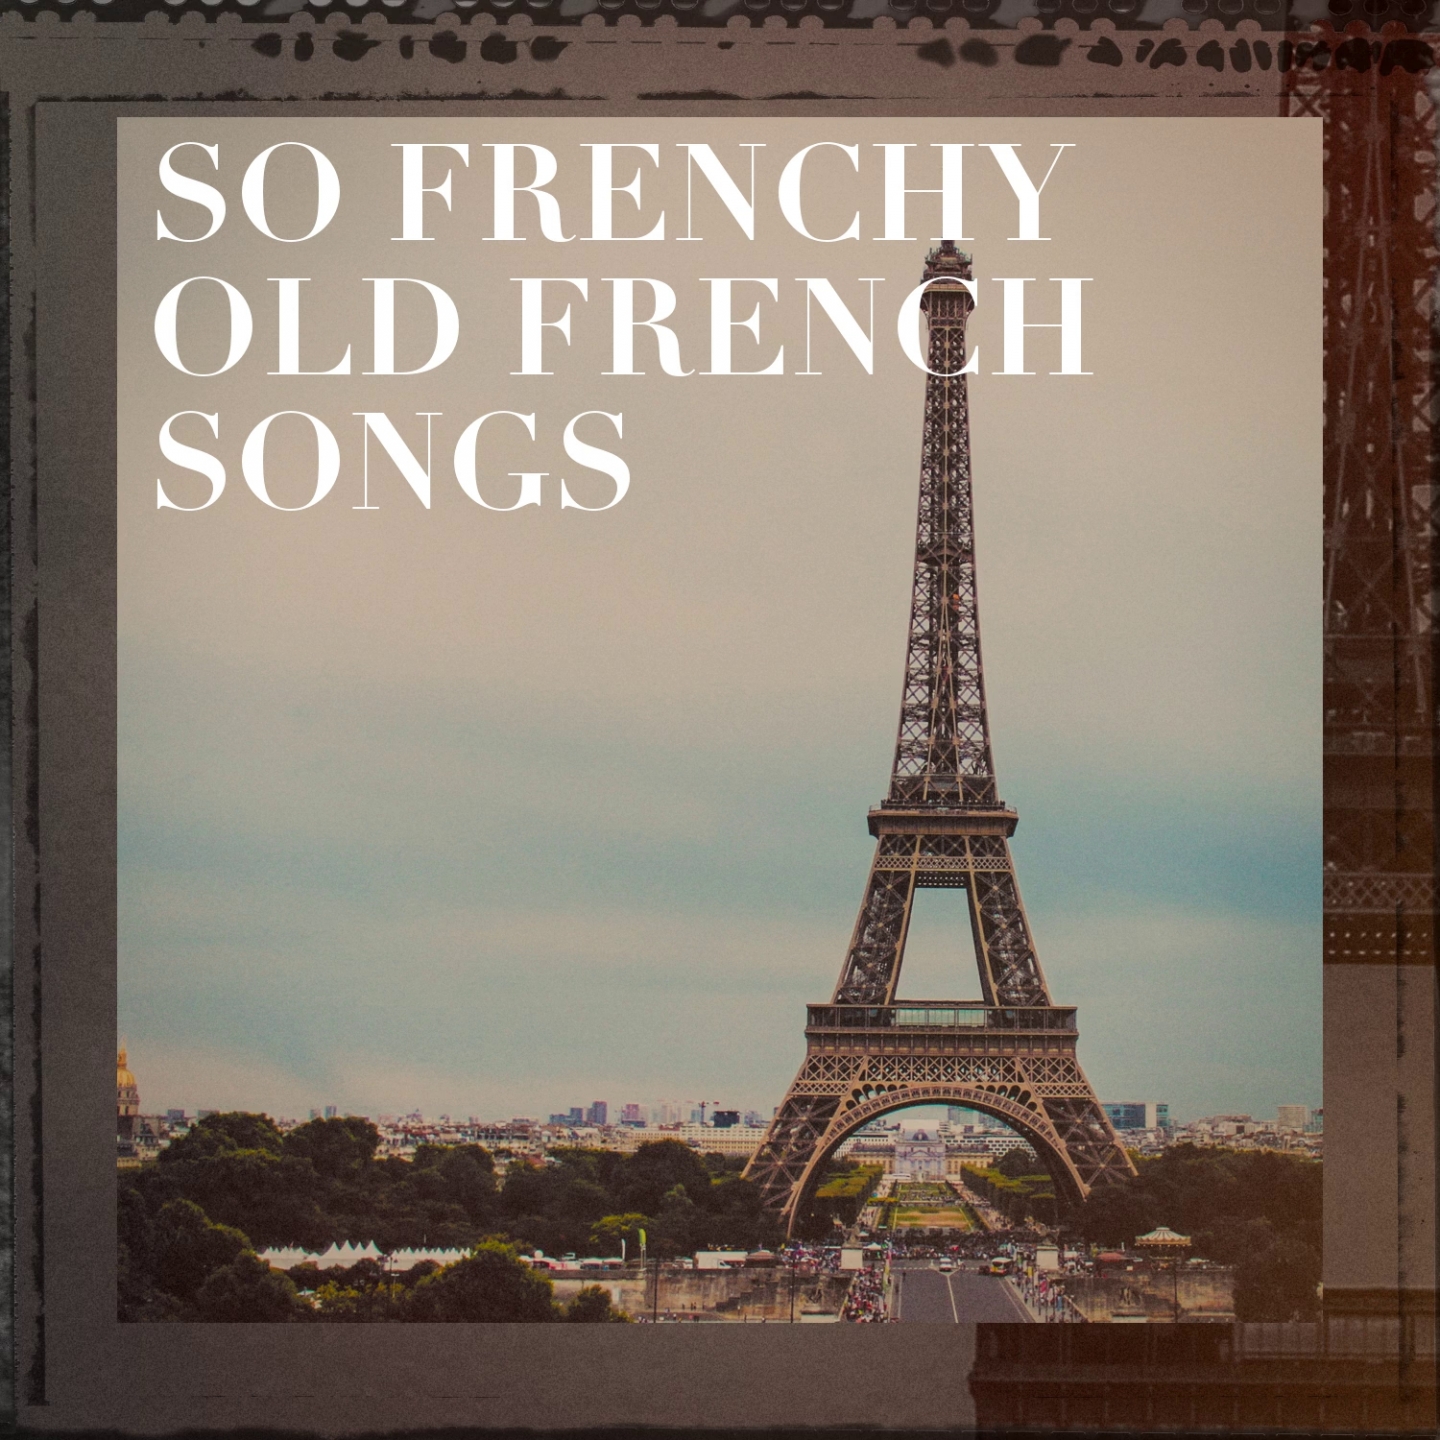 So frenchy old french songs